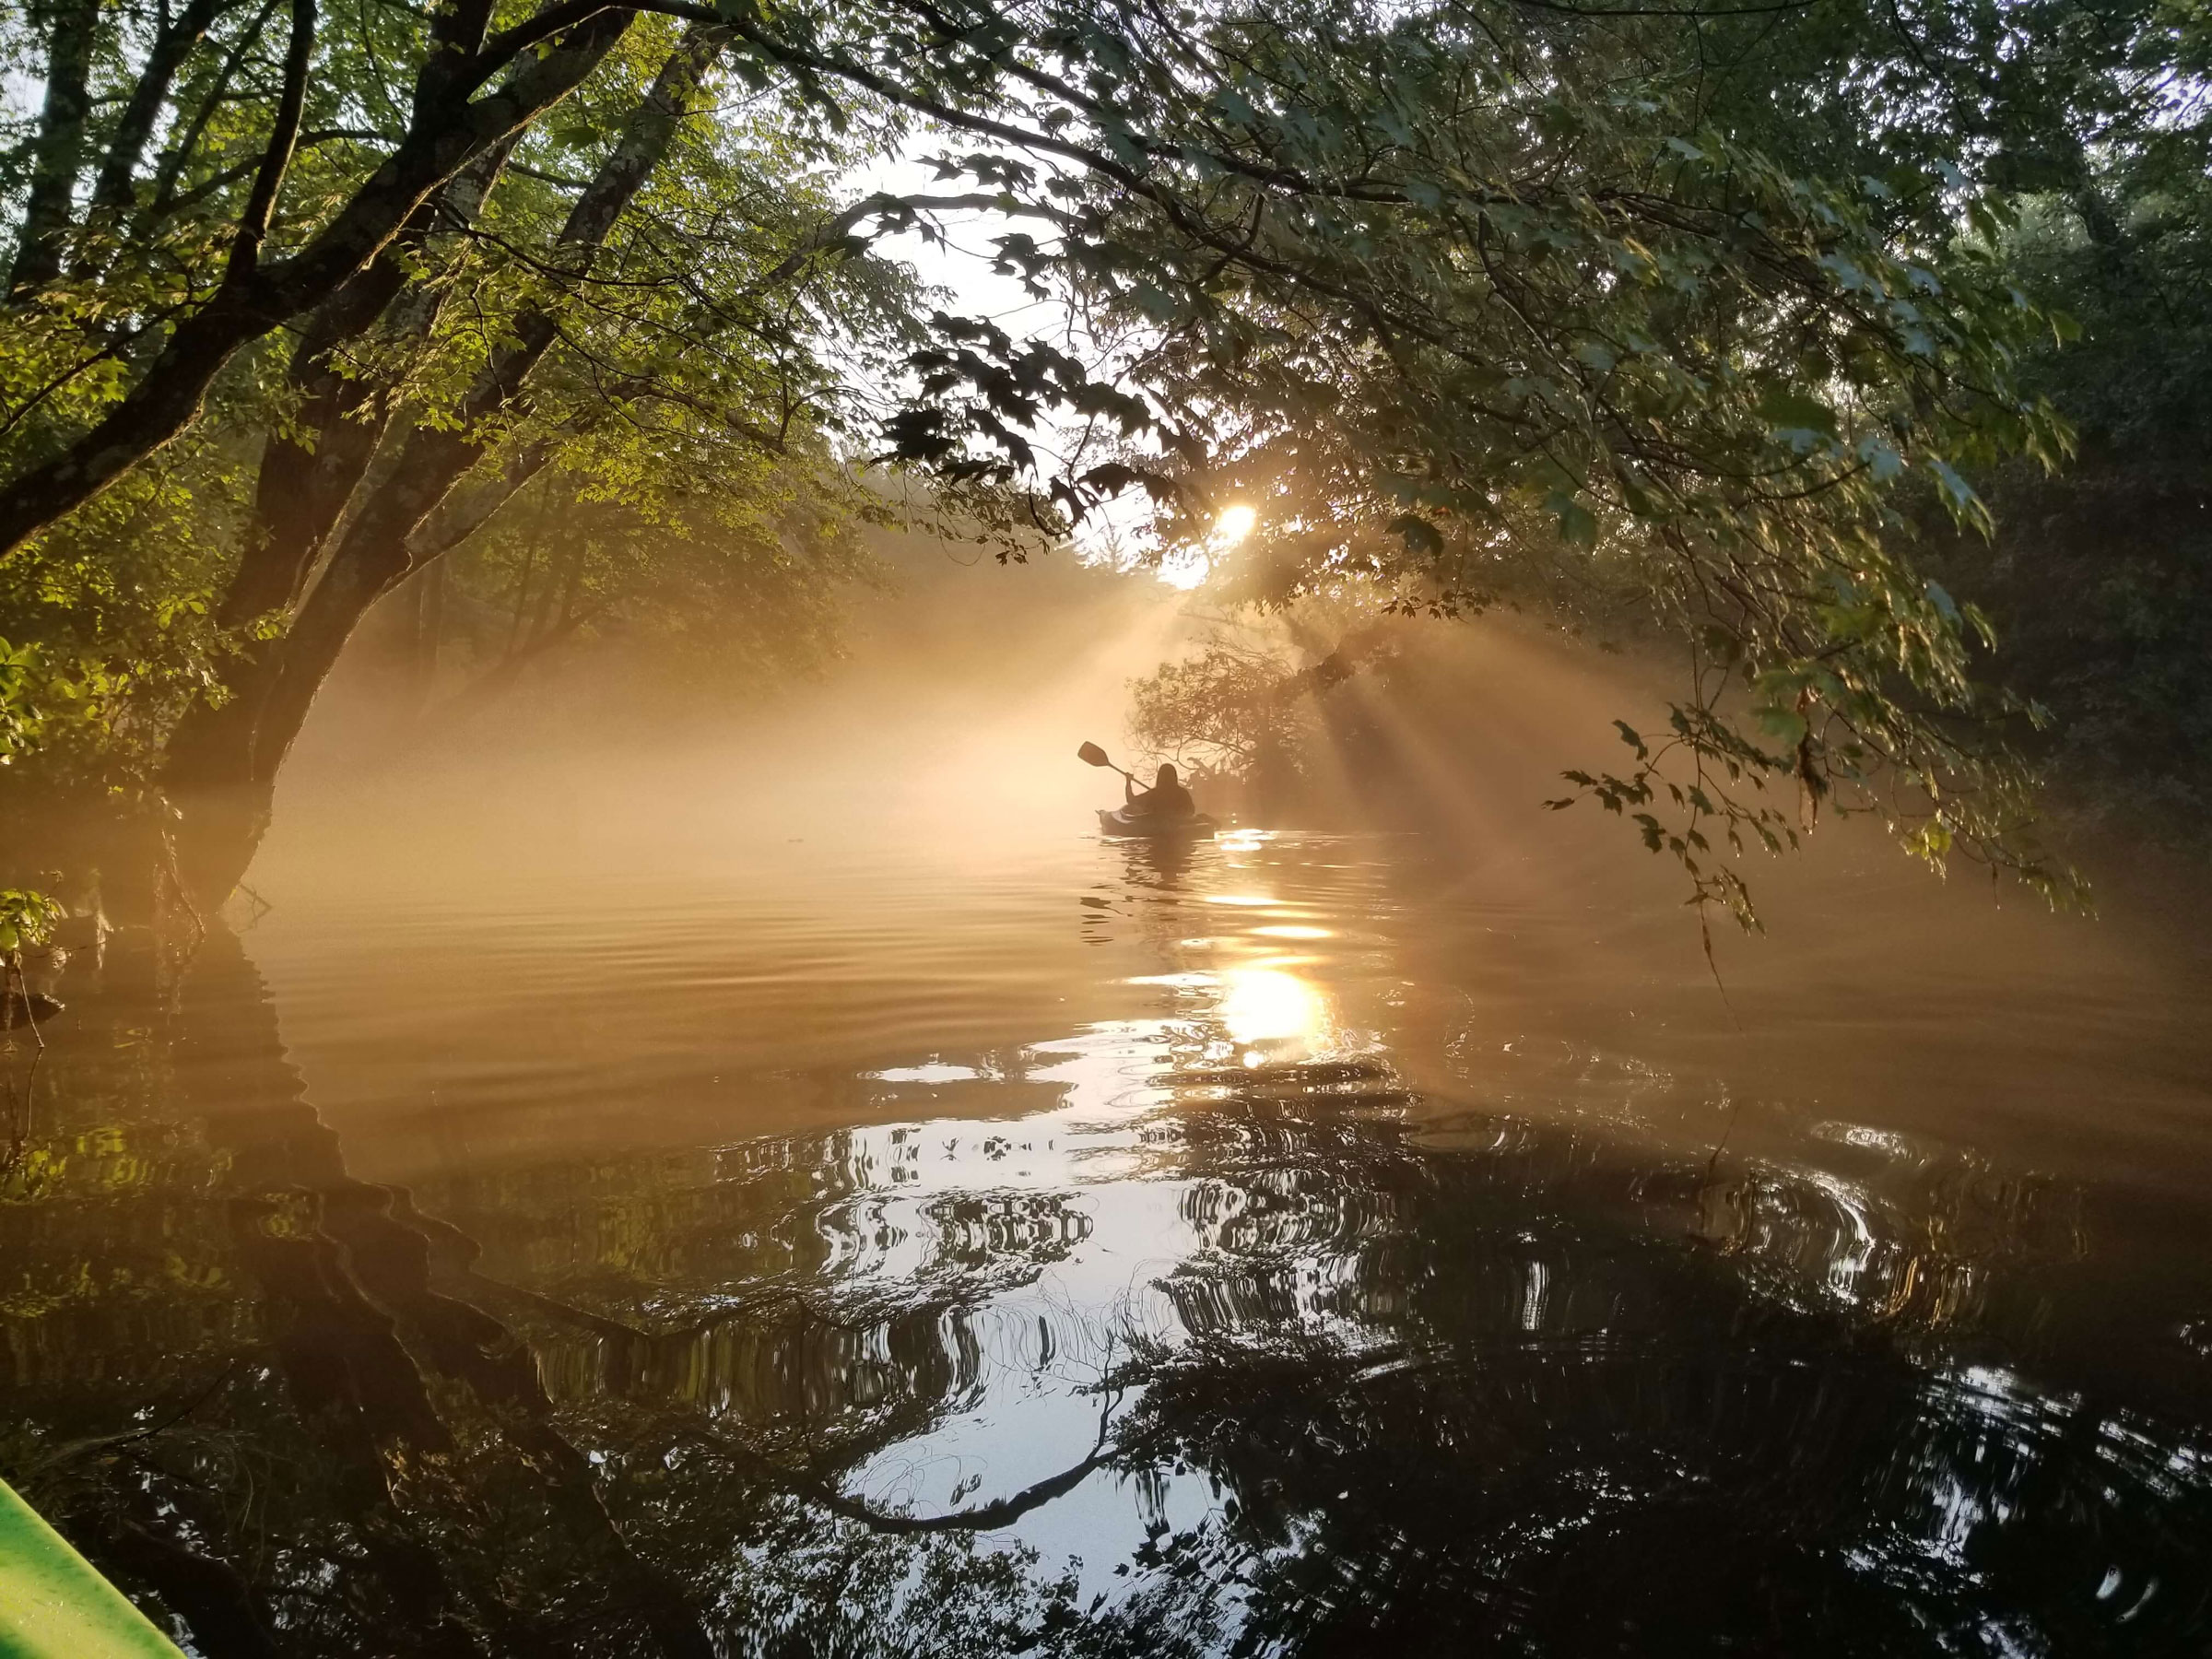 A kayaker canoes through fog that is lit golden by light. Trees make a canopy above them.